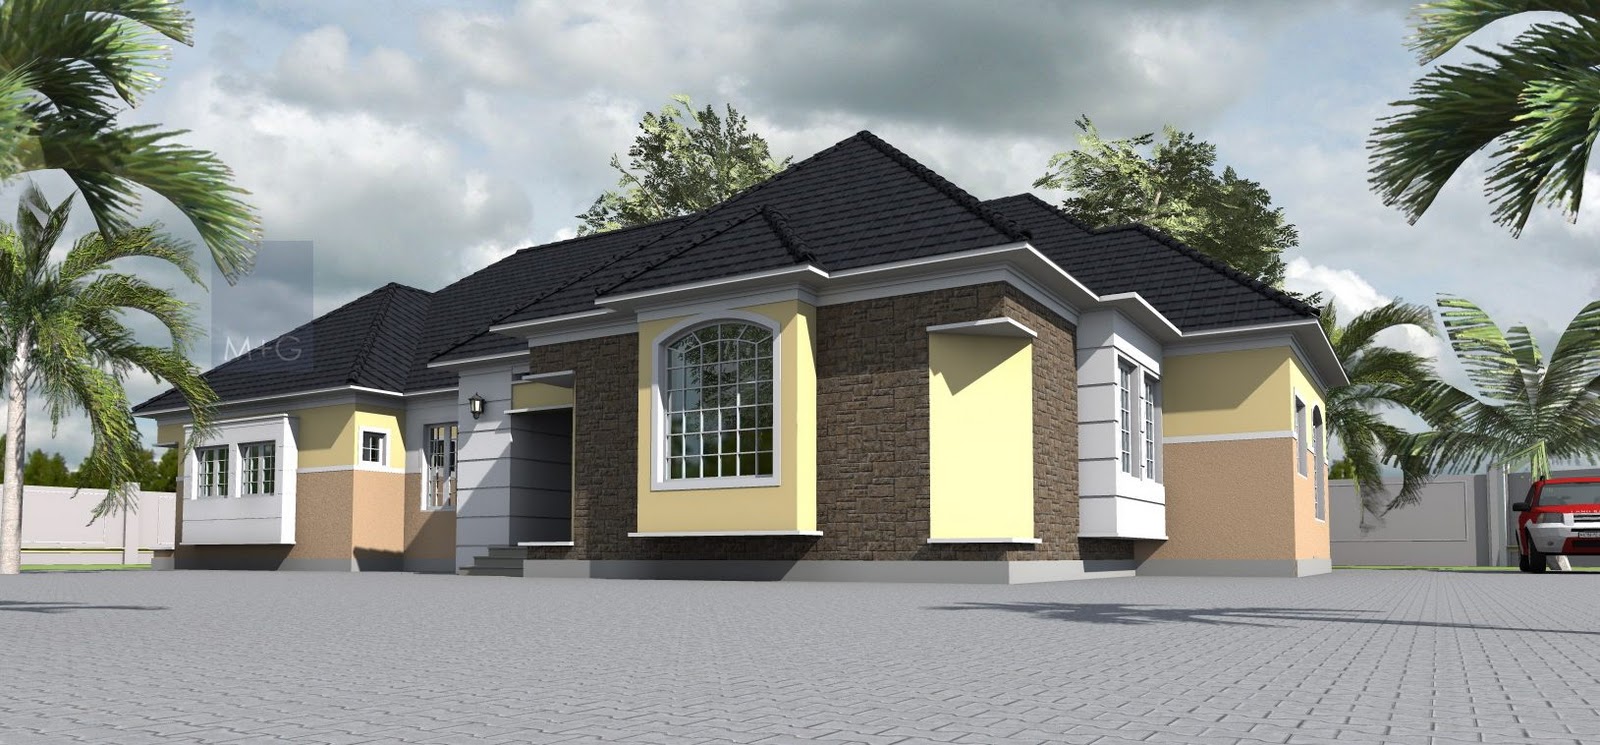 Contemporary Nigerian Residential Architecture 4 Bedroom Bungalow